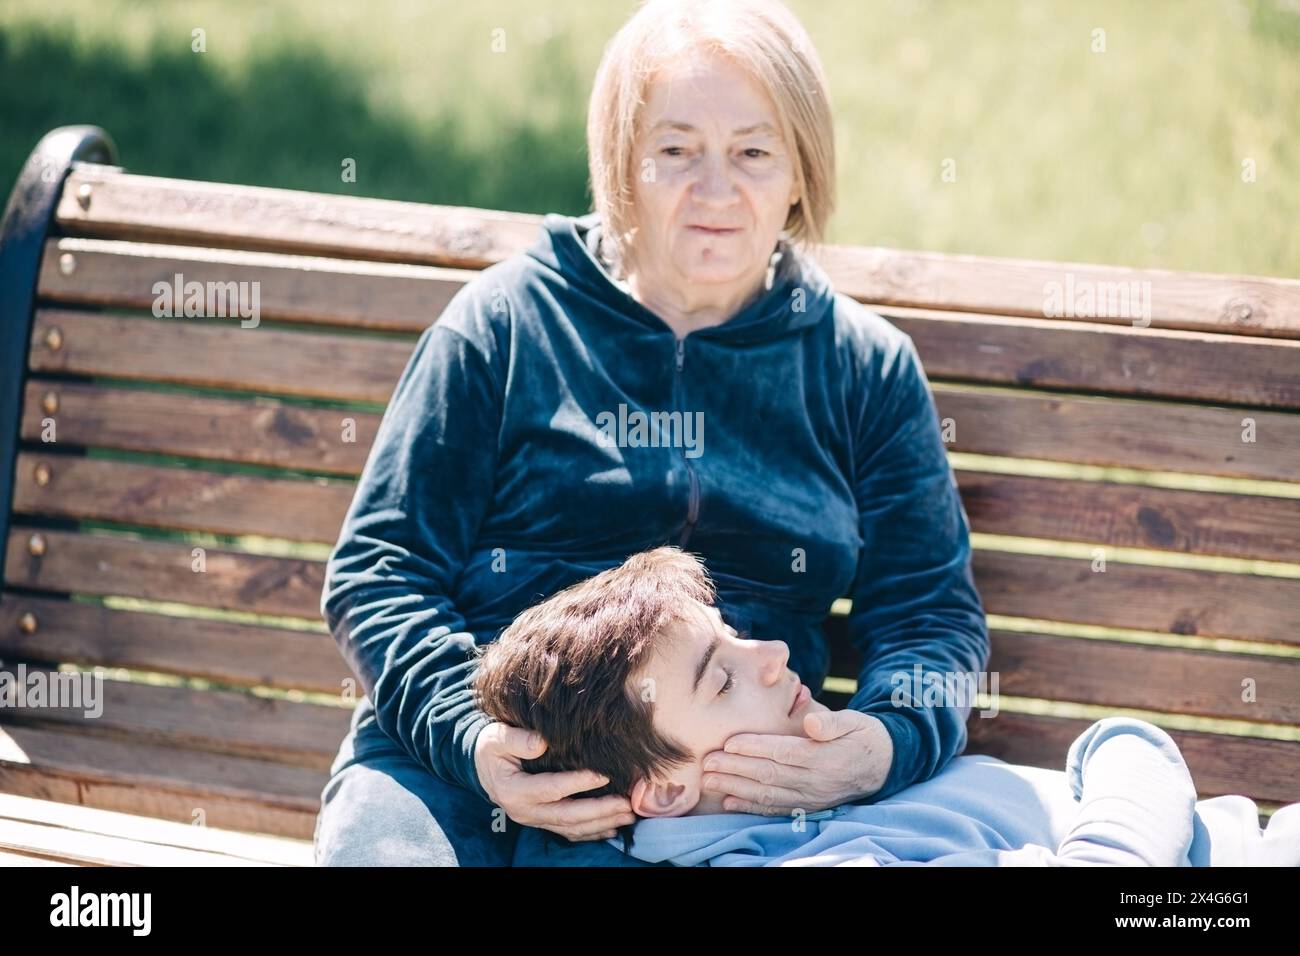 Mature woman holding her grandson Stock Photo